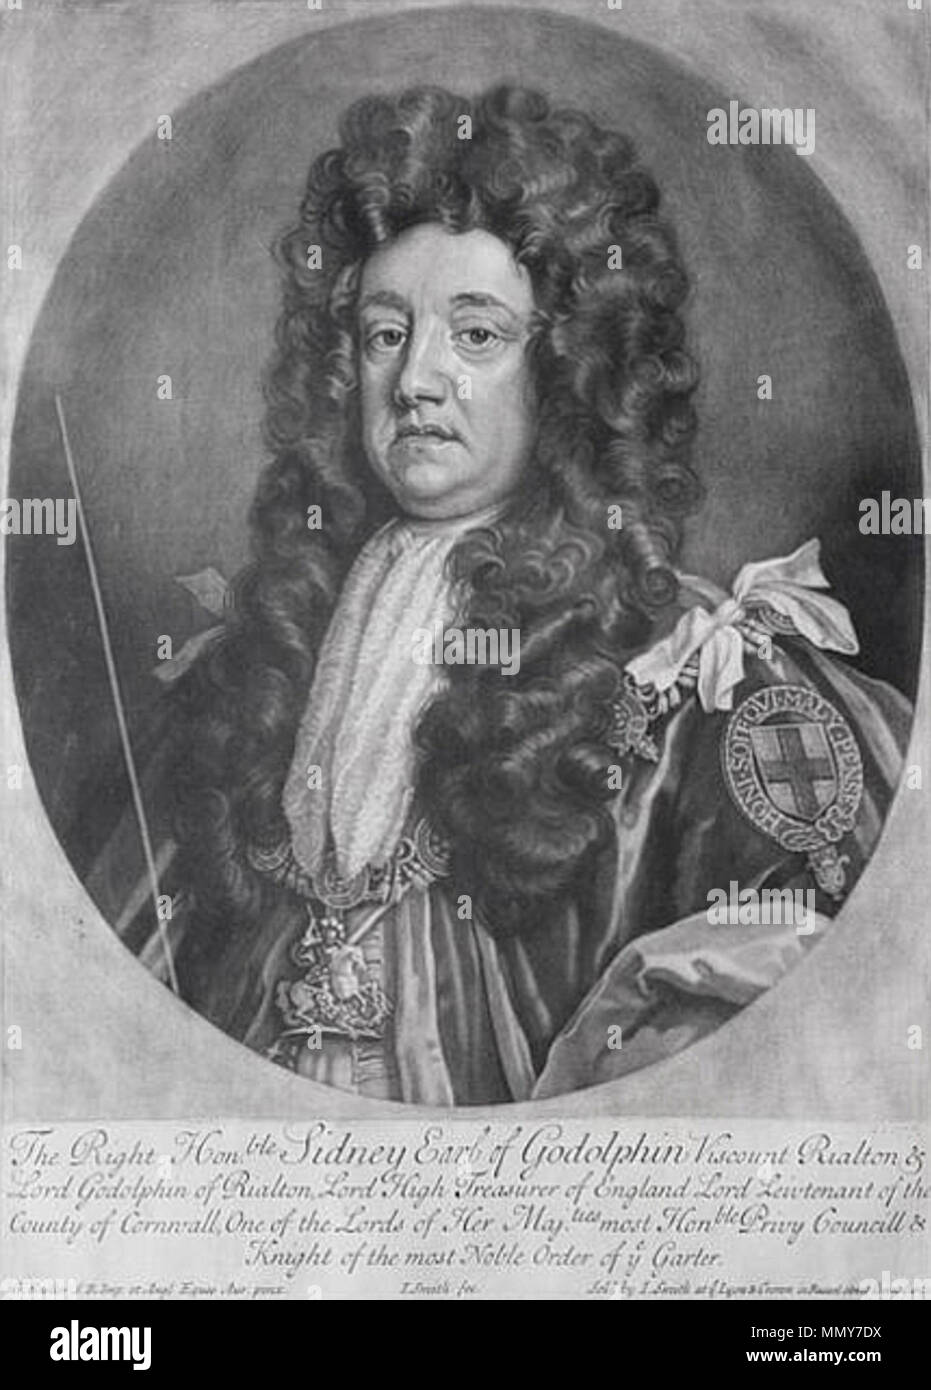 . Sidney Godolphin - 1st Earl of Godolphin (1645-1712) The Right Hon.ble Sidney Earl of Godolphin Viscount Rialton & Lord Godolphin of Rialton, Lord High Treasurer of England Lord Lieutenant of the County of Cornwall, One of the Lords of Her Maj.ties most Hon.ble Privy Council & Knight of the most Noble Order of the Garter  . between 1705 and 1707.   John Smith  (1652–1742)     Alternative names John i Smith; John I Smith  Description British engraver and printseller  Date of birth/death 1652 1742  Location of birth/death Daventry Northamptonshire  Work location London  Authority control  : Q6 Stock Photo